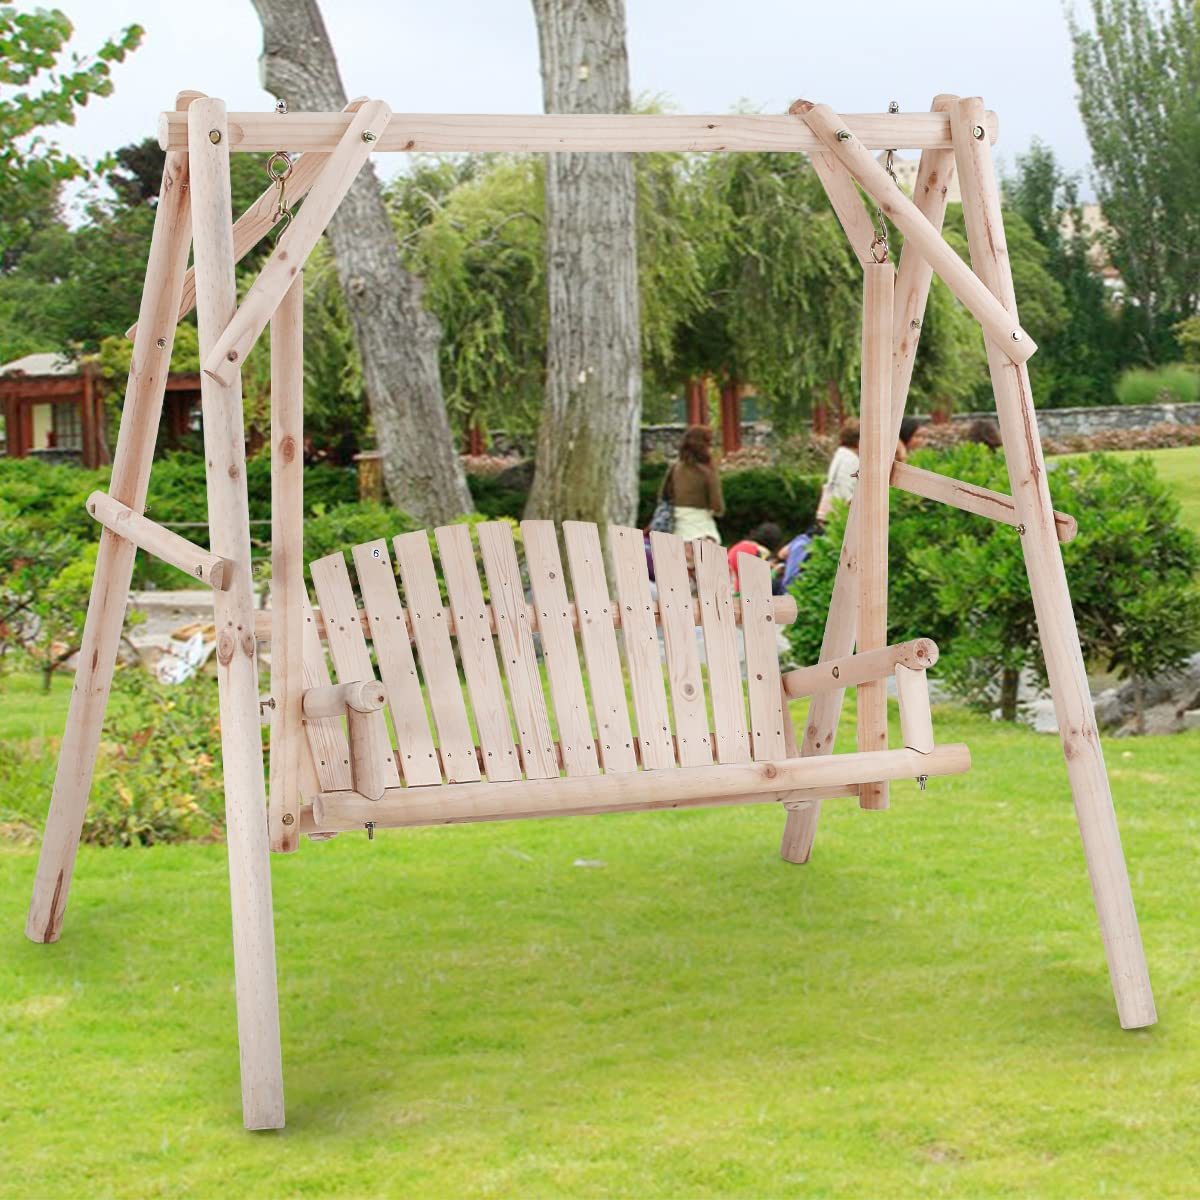 YRLLENSDAN Wooden Swing Chair, 67 inch A-Frame Free Standing Porch Swings, Outdoor Log Porch Swing Wooden frame Garden Swing Patio Beach Swing Set Patio Chairs - image 1 of 7